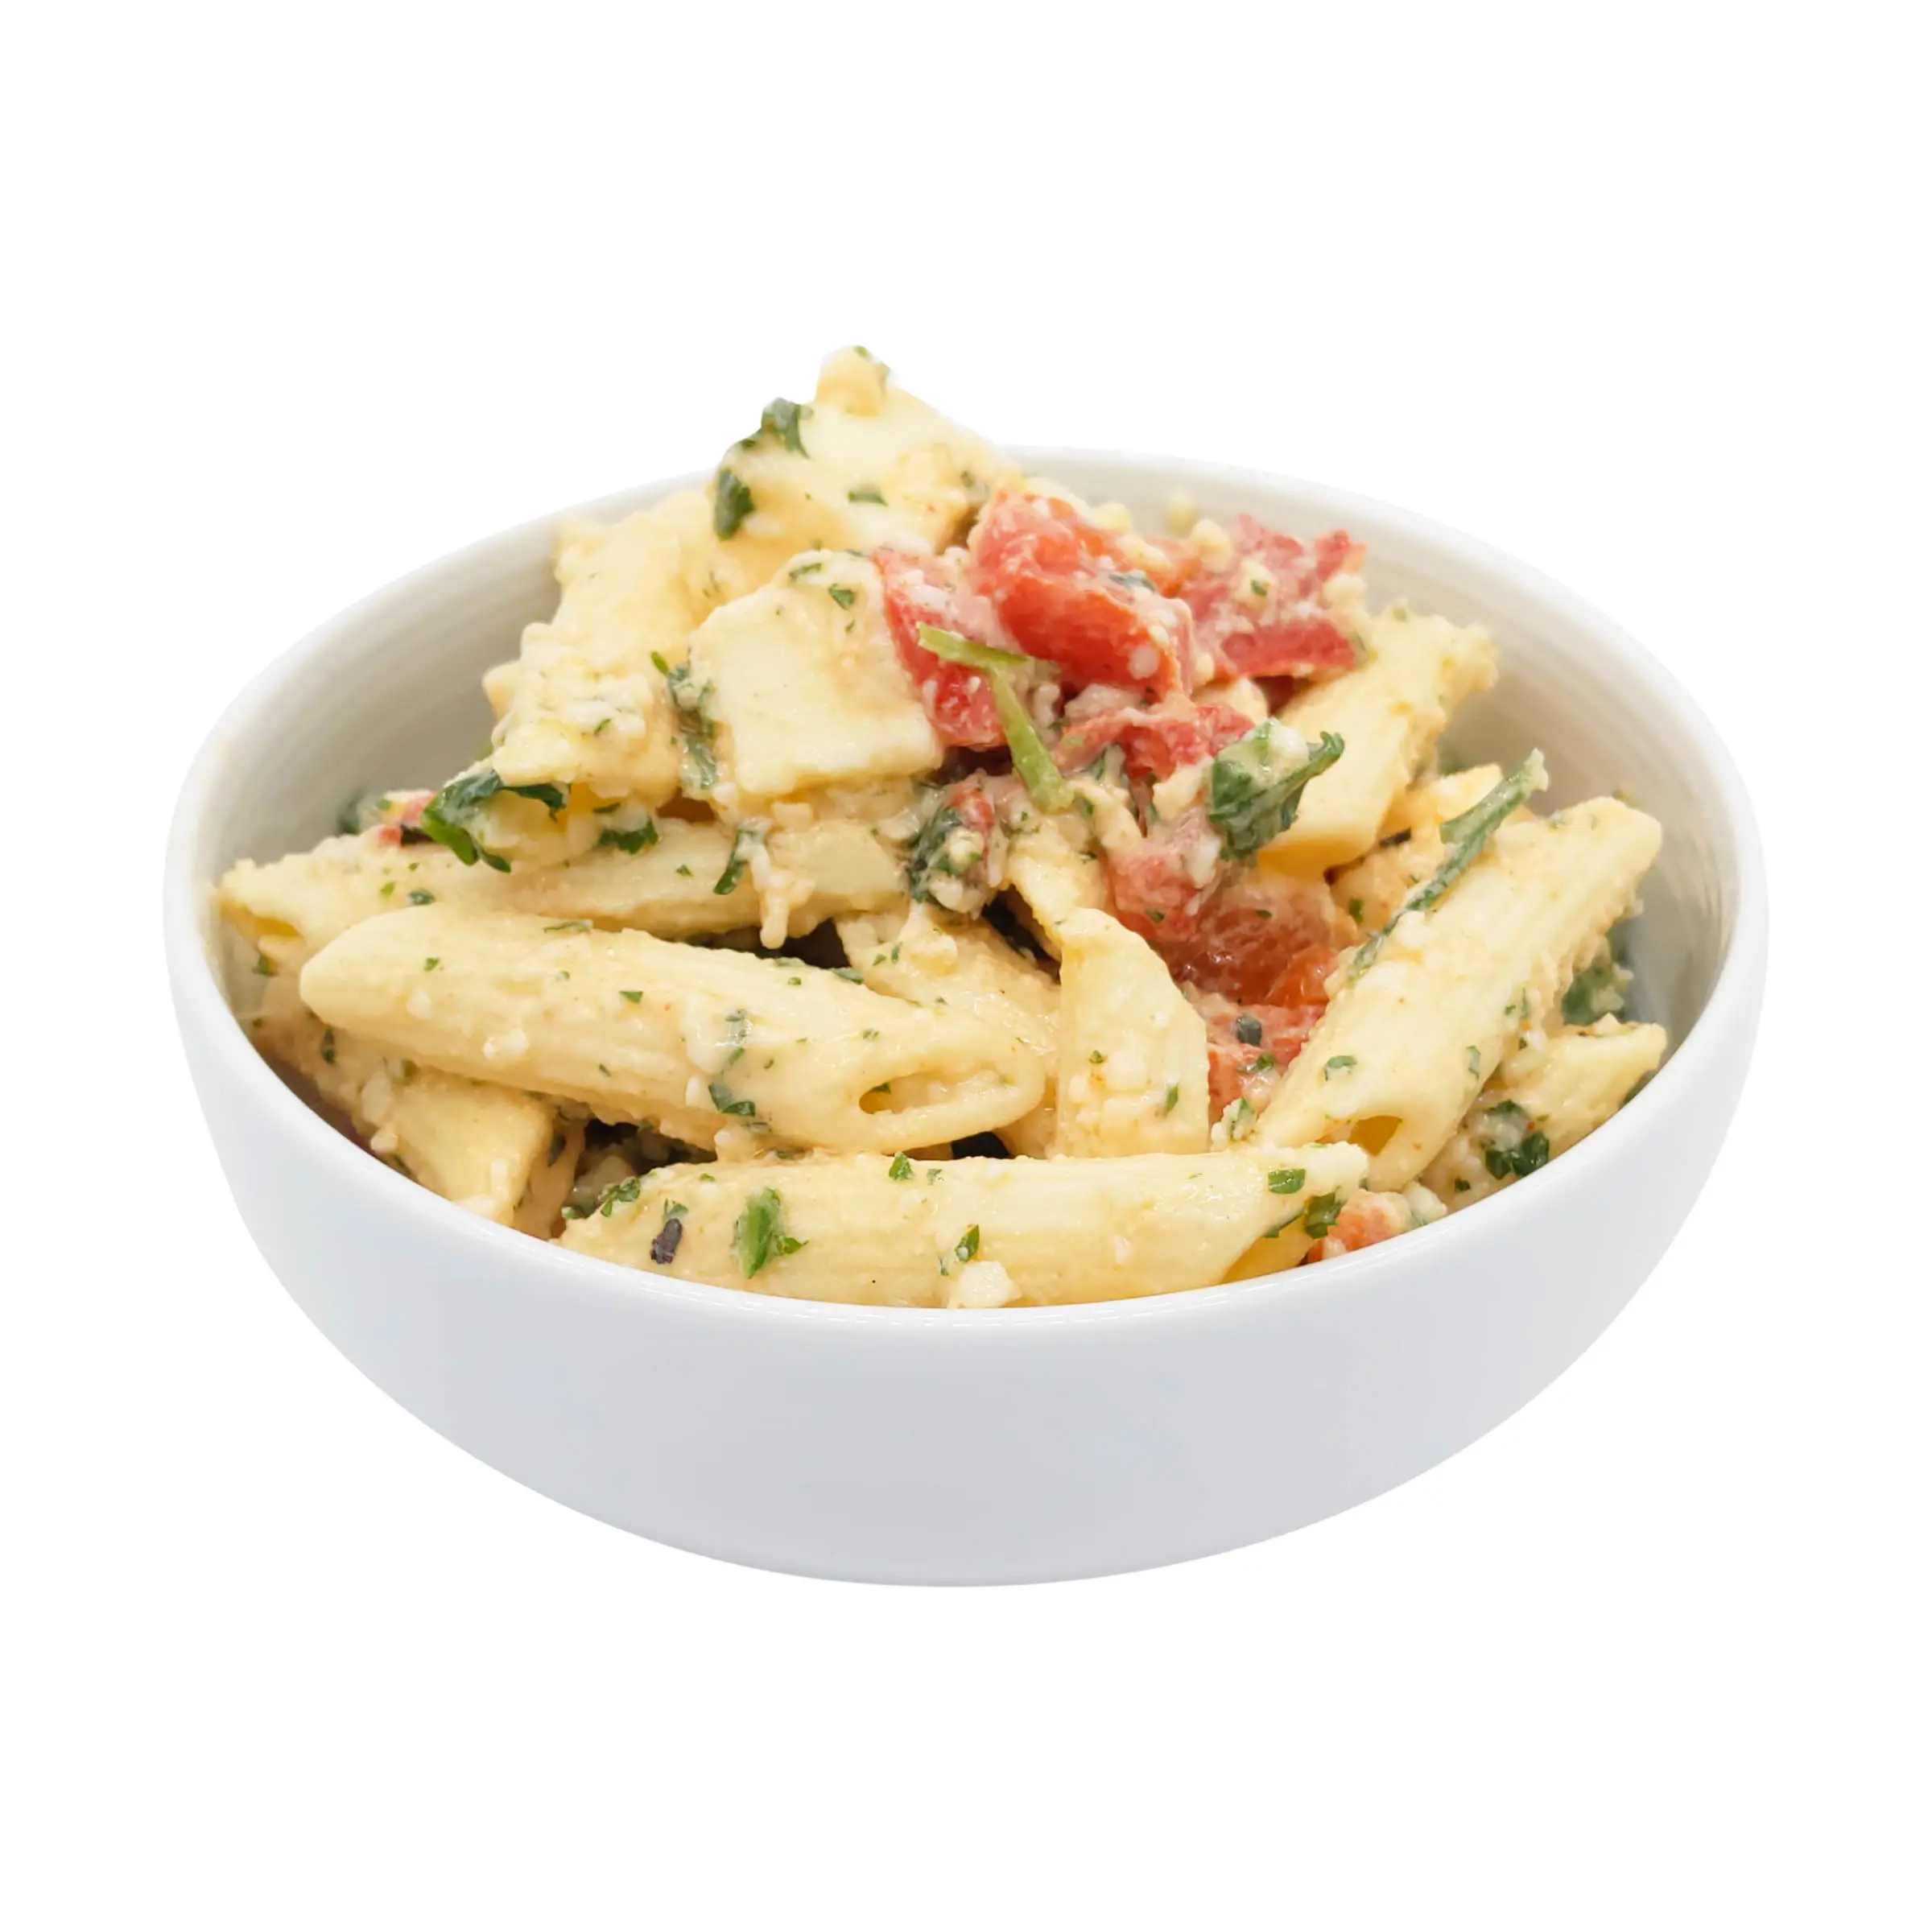 whole foods smoked mozzarella pasta salad - What is the best pasta for pasta salad